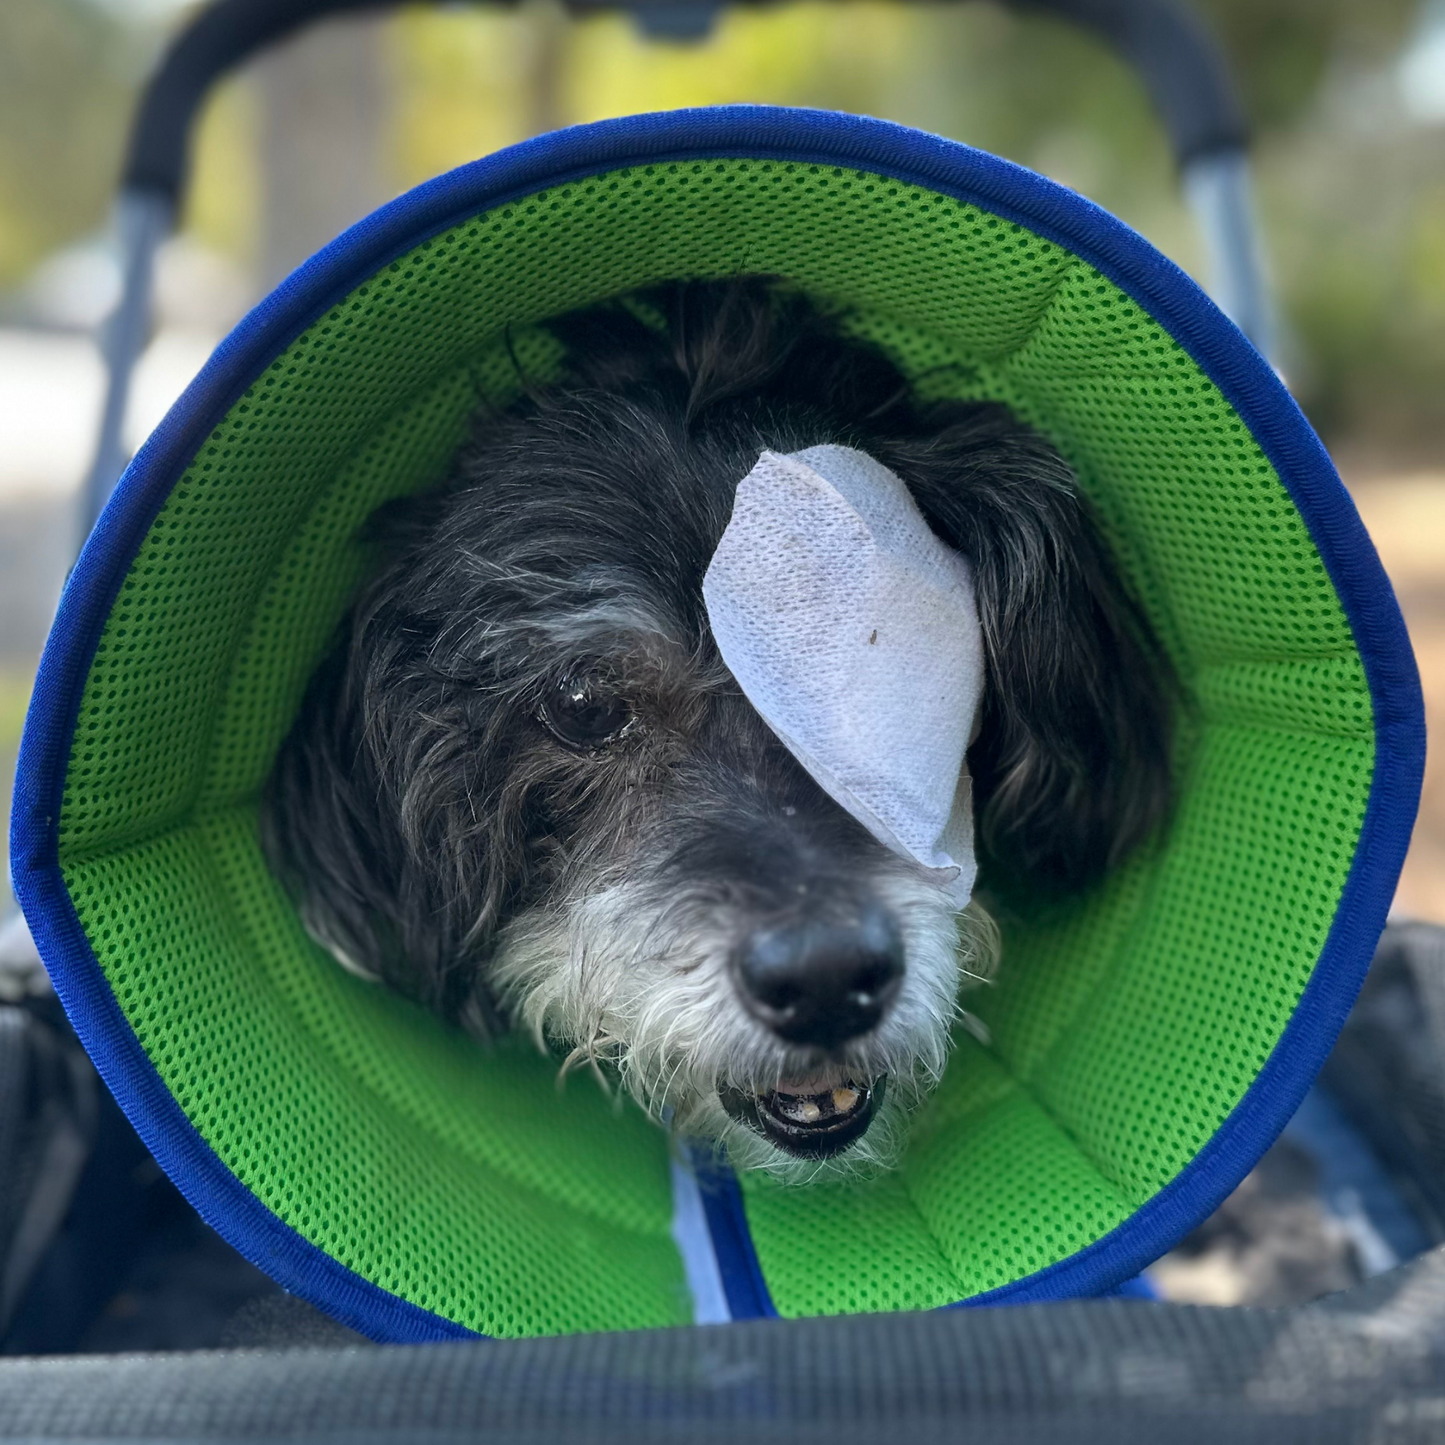 Plush Elizabethan Recovery Cone Collar | Cone of less shame | Blue Green